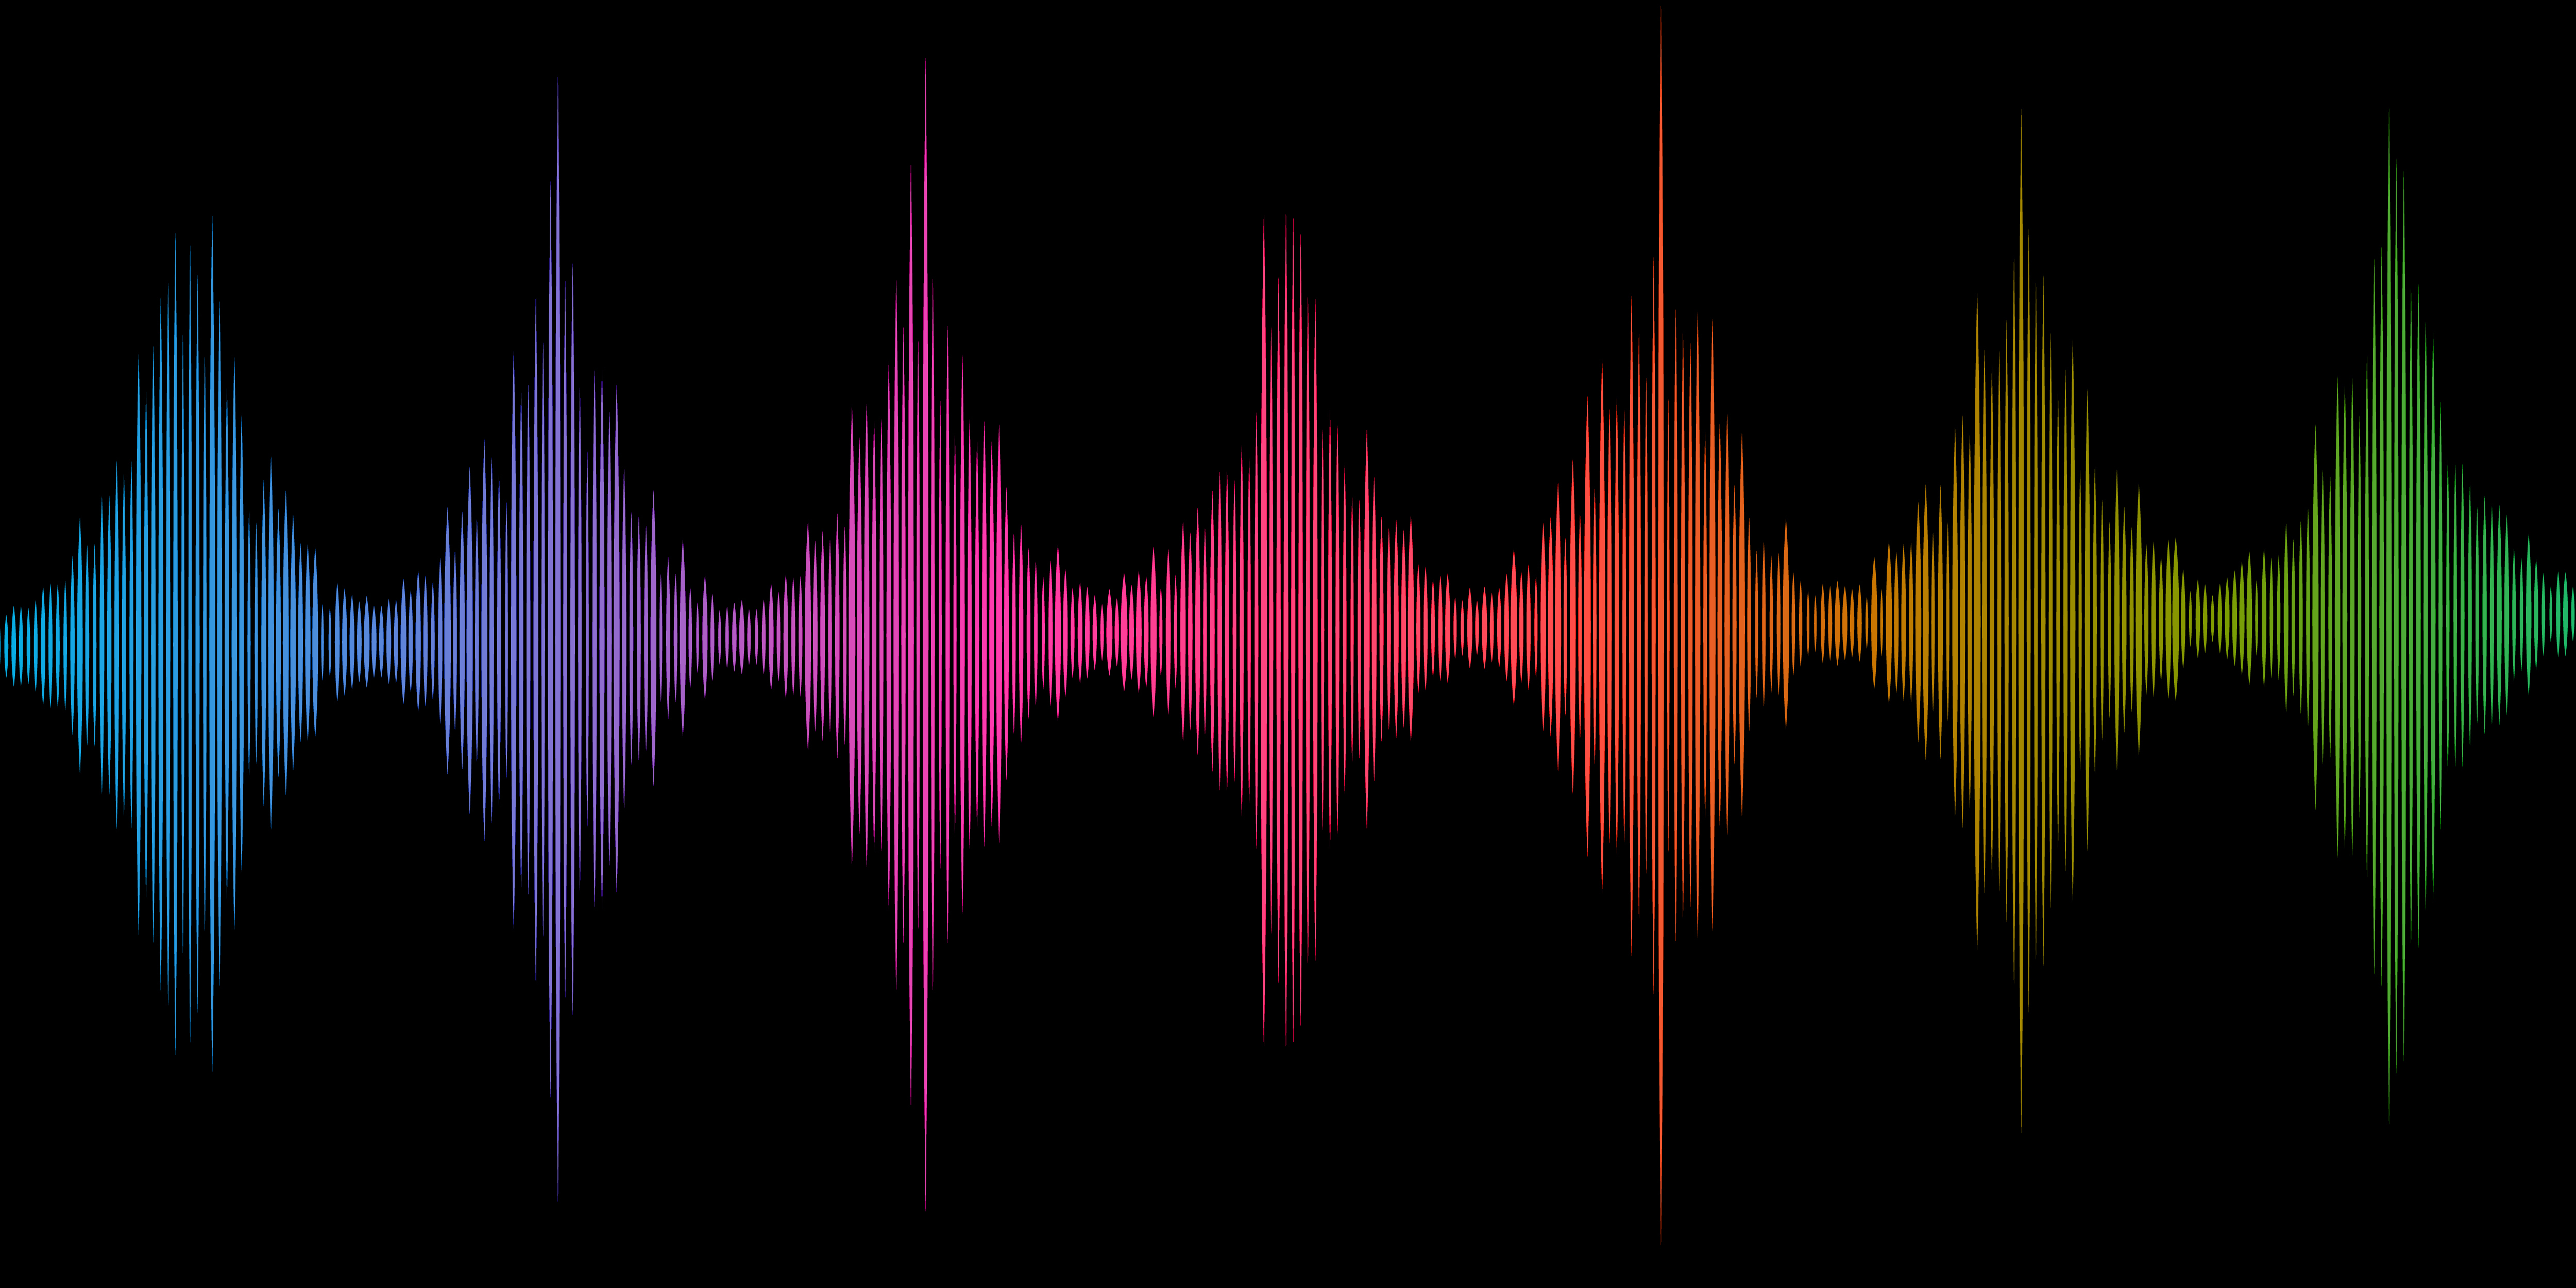 abstract-sound-waves-background-vector.jpg